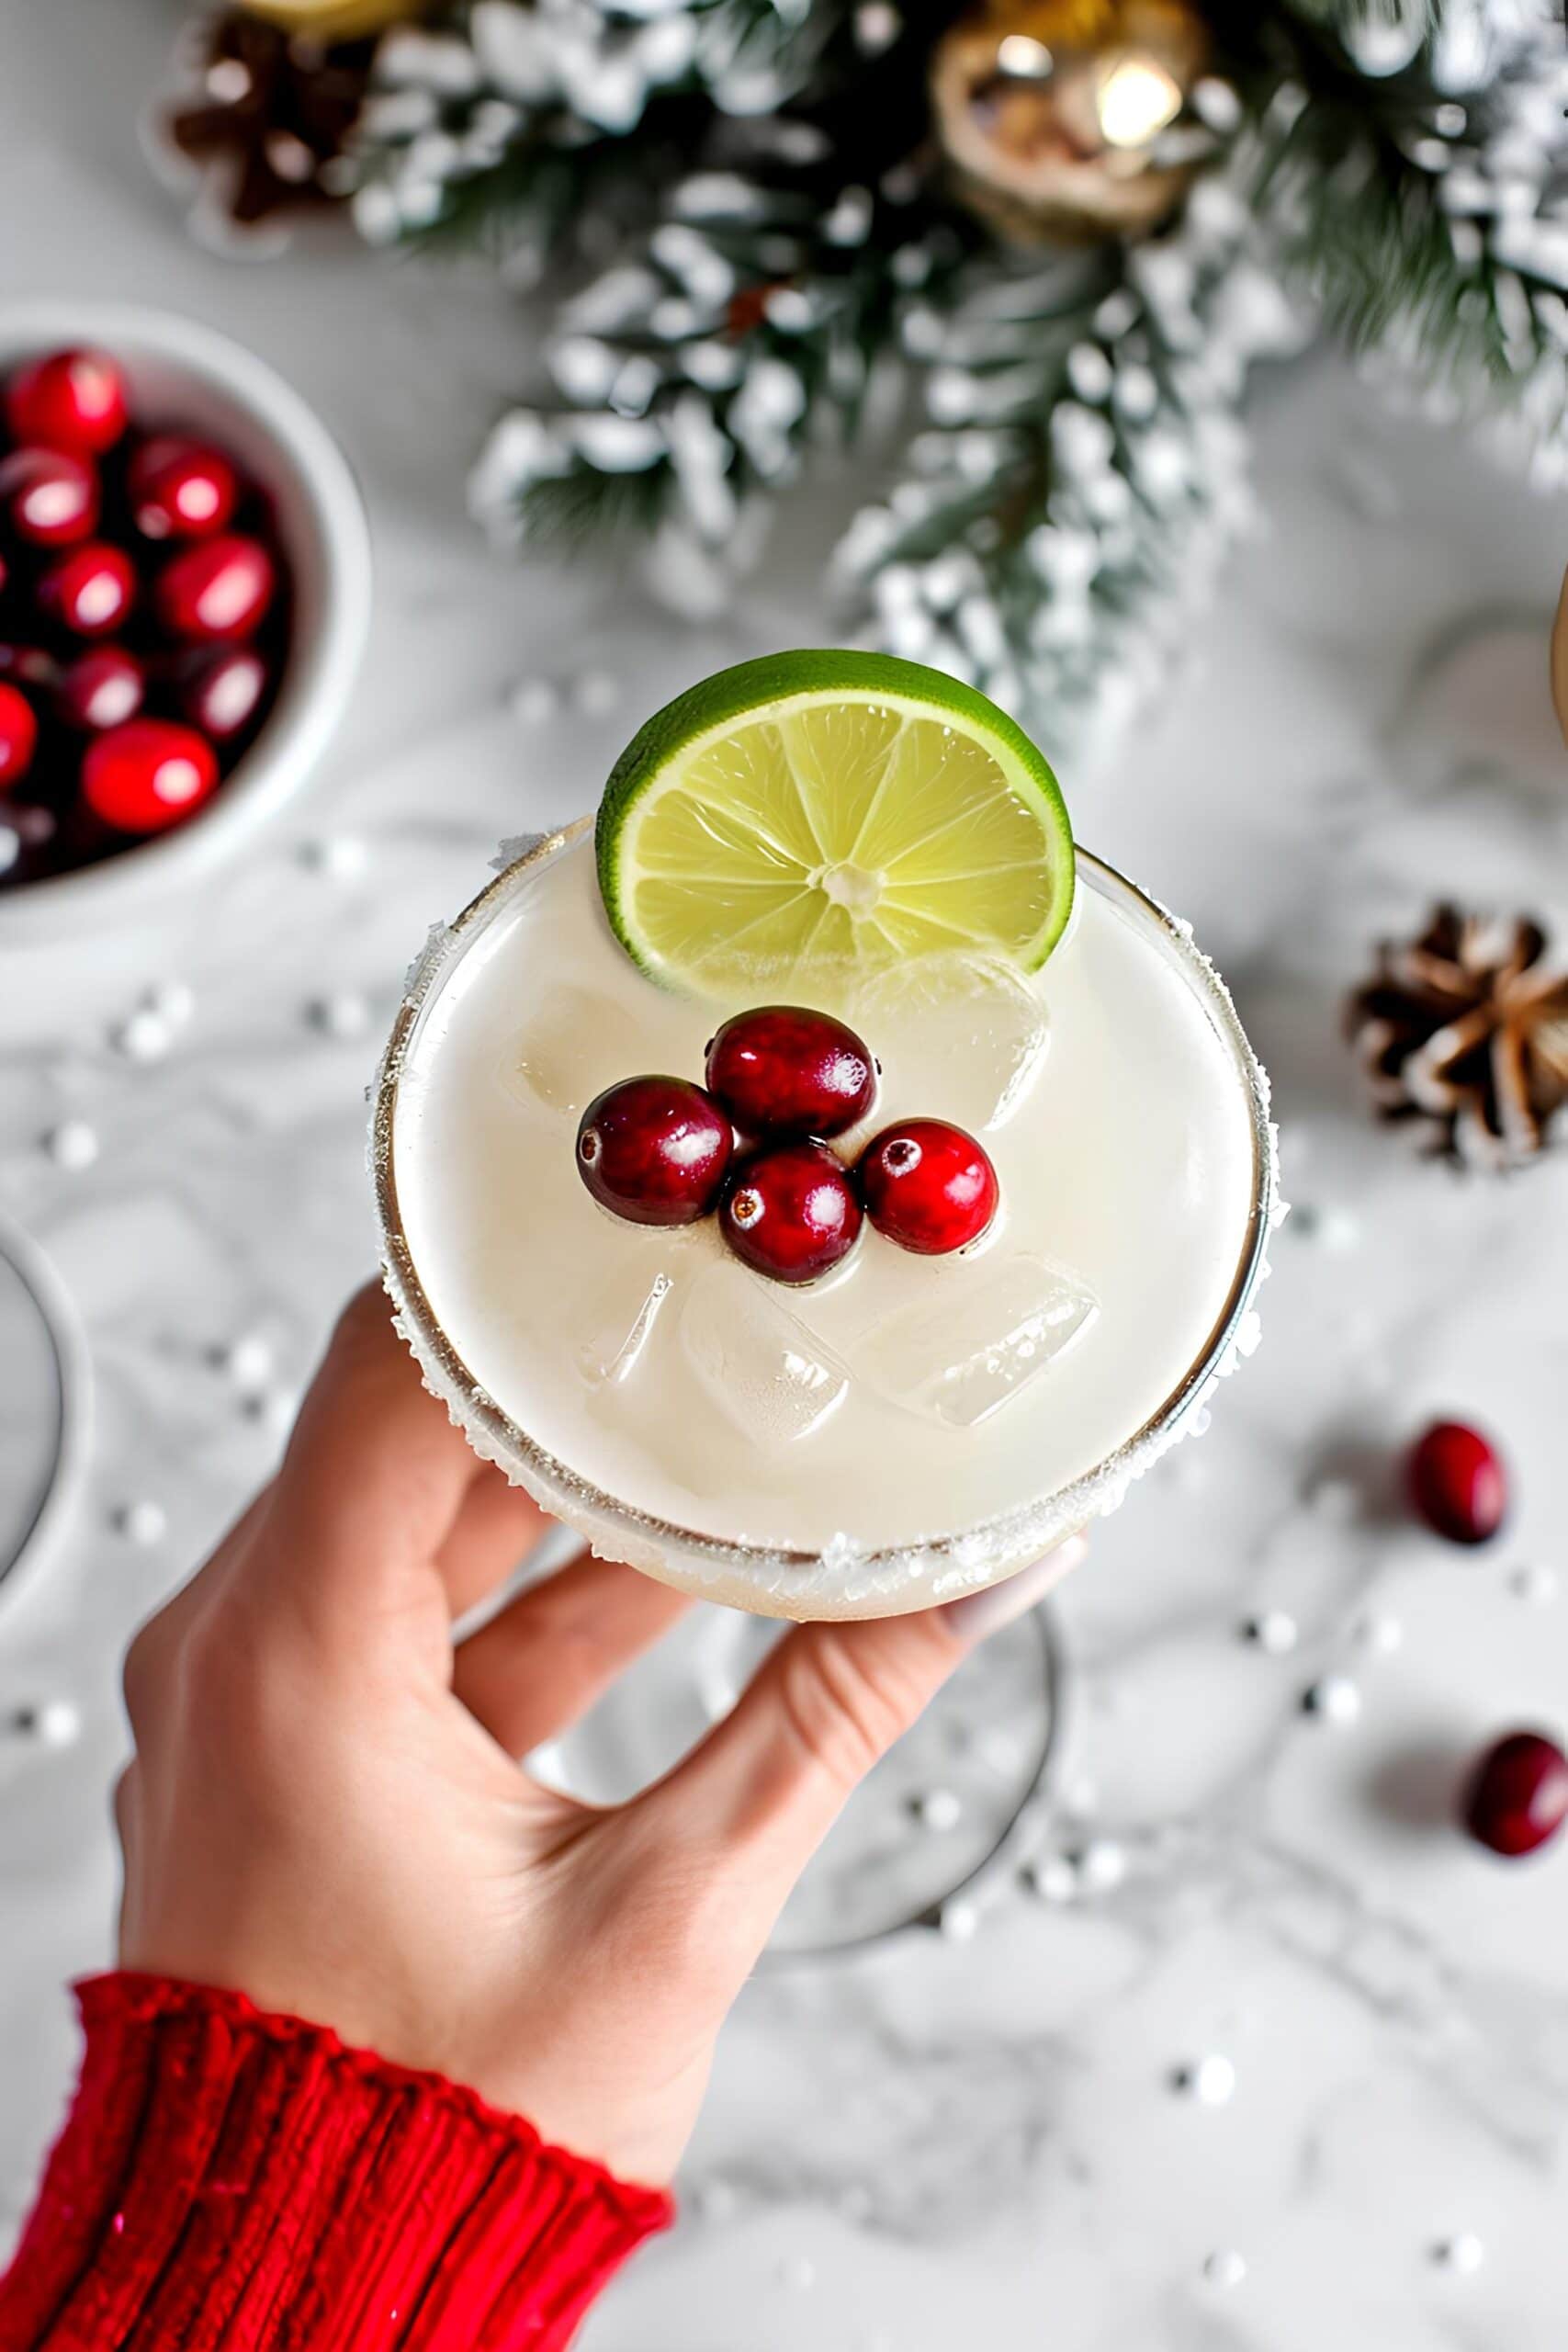 Easy White Christmas Margarita Recipe: A hand holding a white Christmas margarita garnished with lime wedges and cranberries